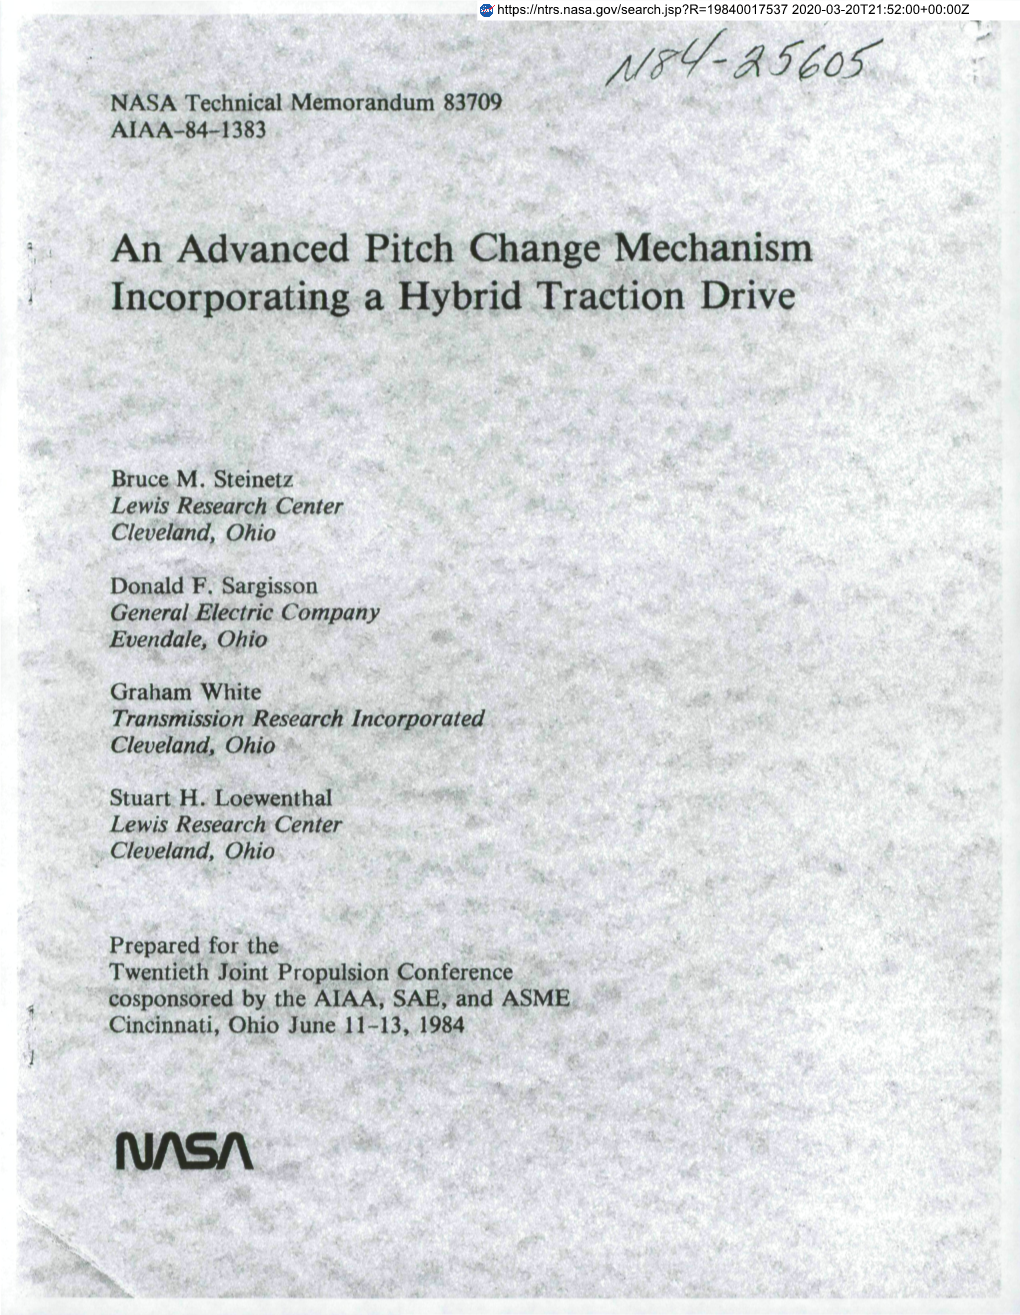 An Advanced Pitch Change Mechanism Incorporating a Hybrid Traction Drive